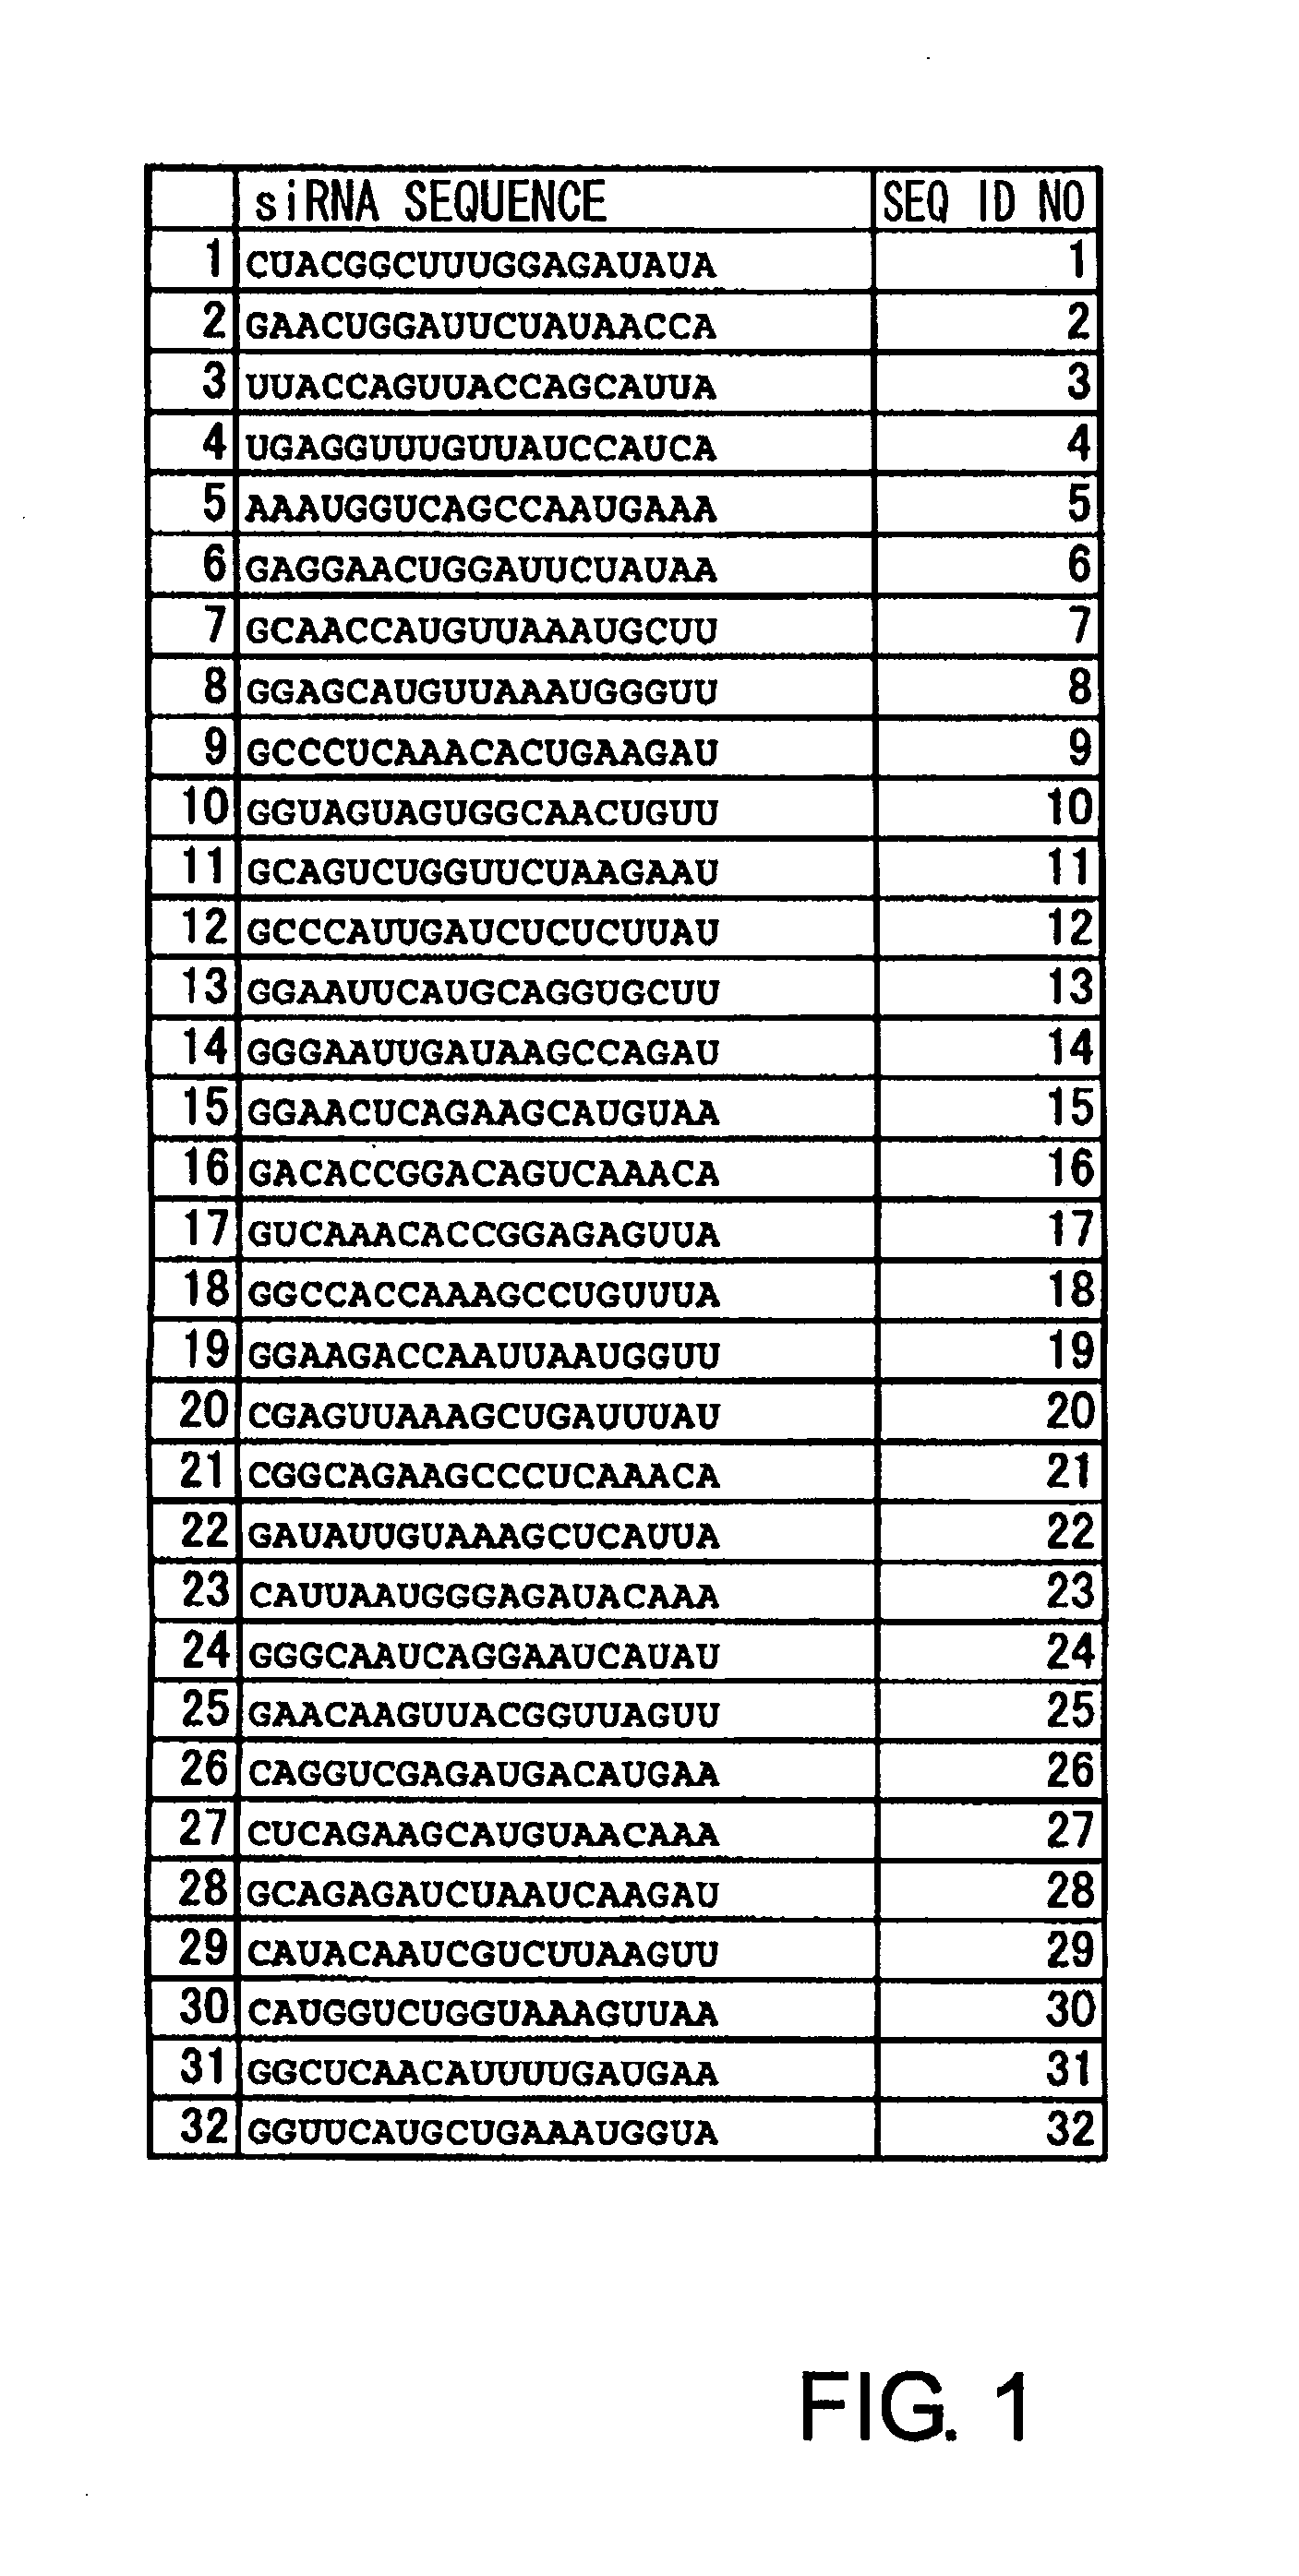 Cancer-cell-specific cytostatic agent